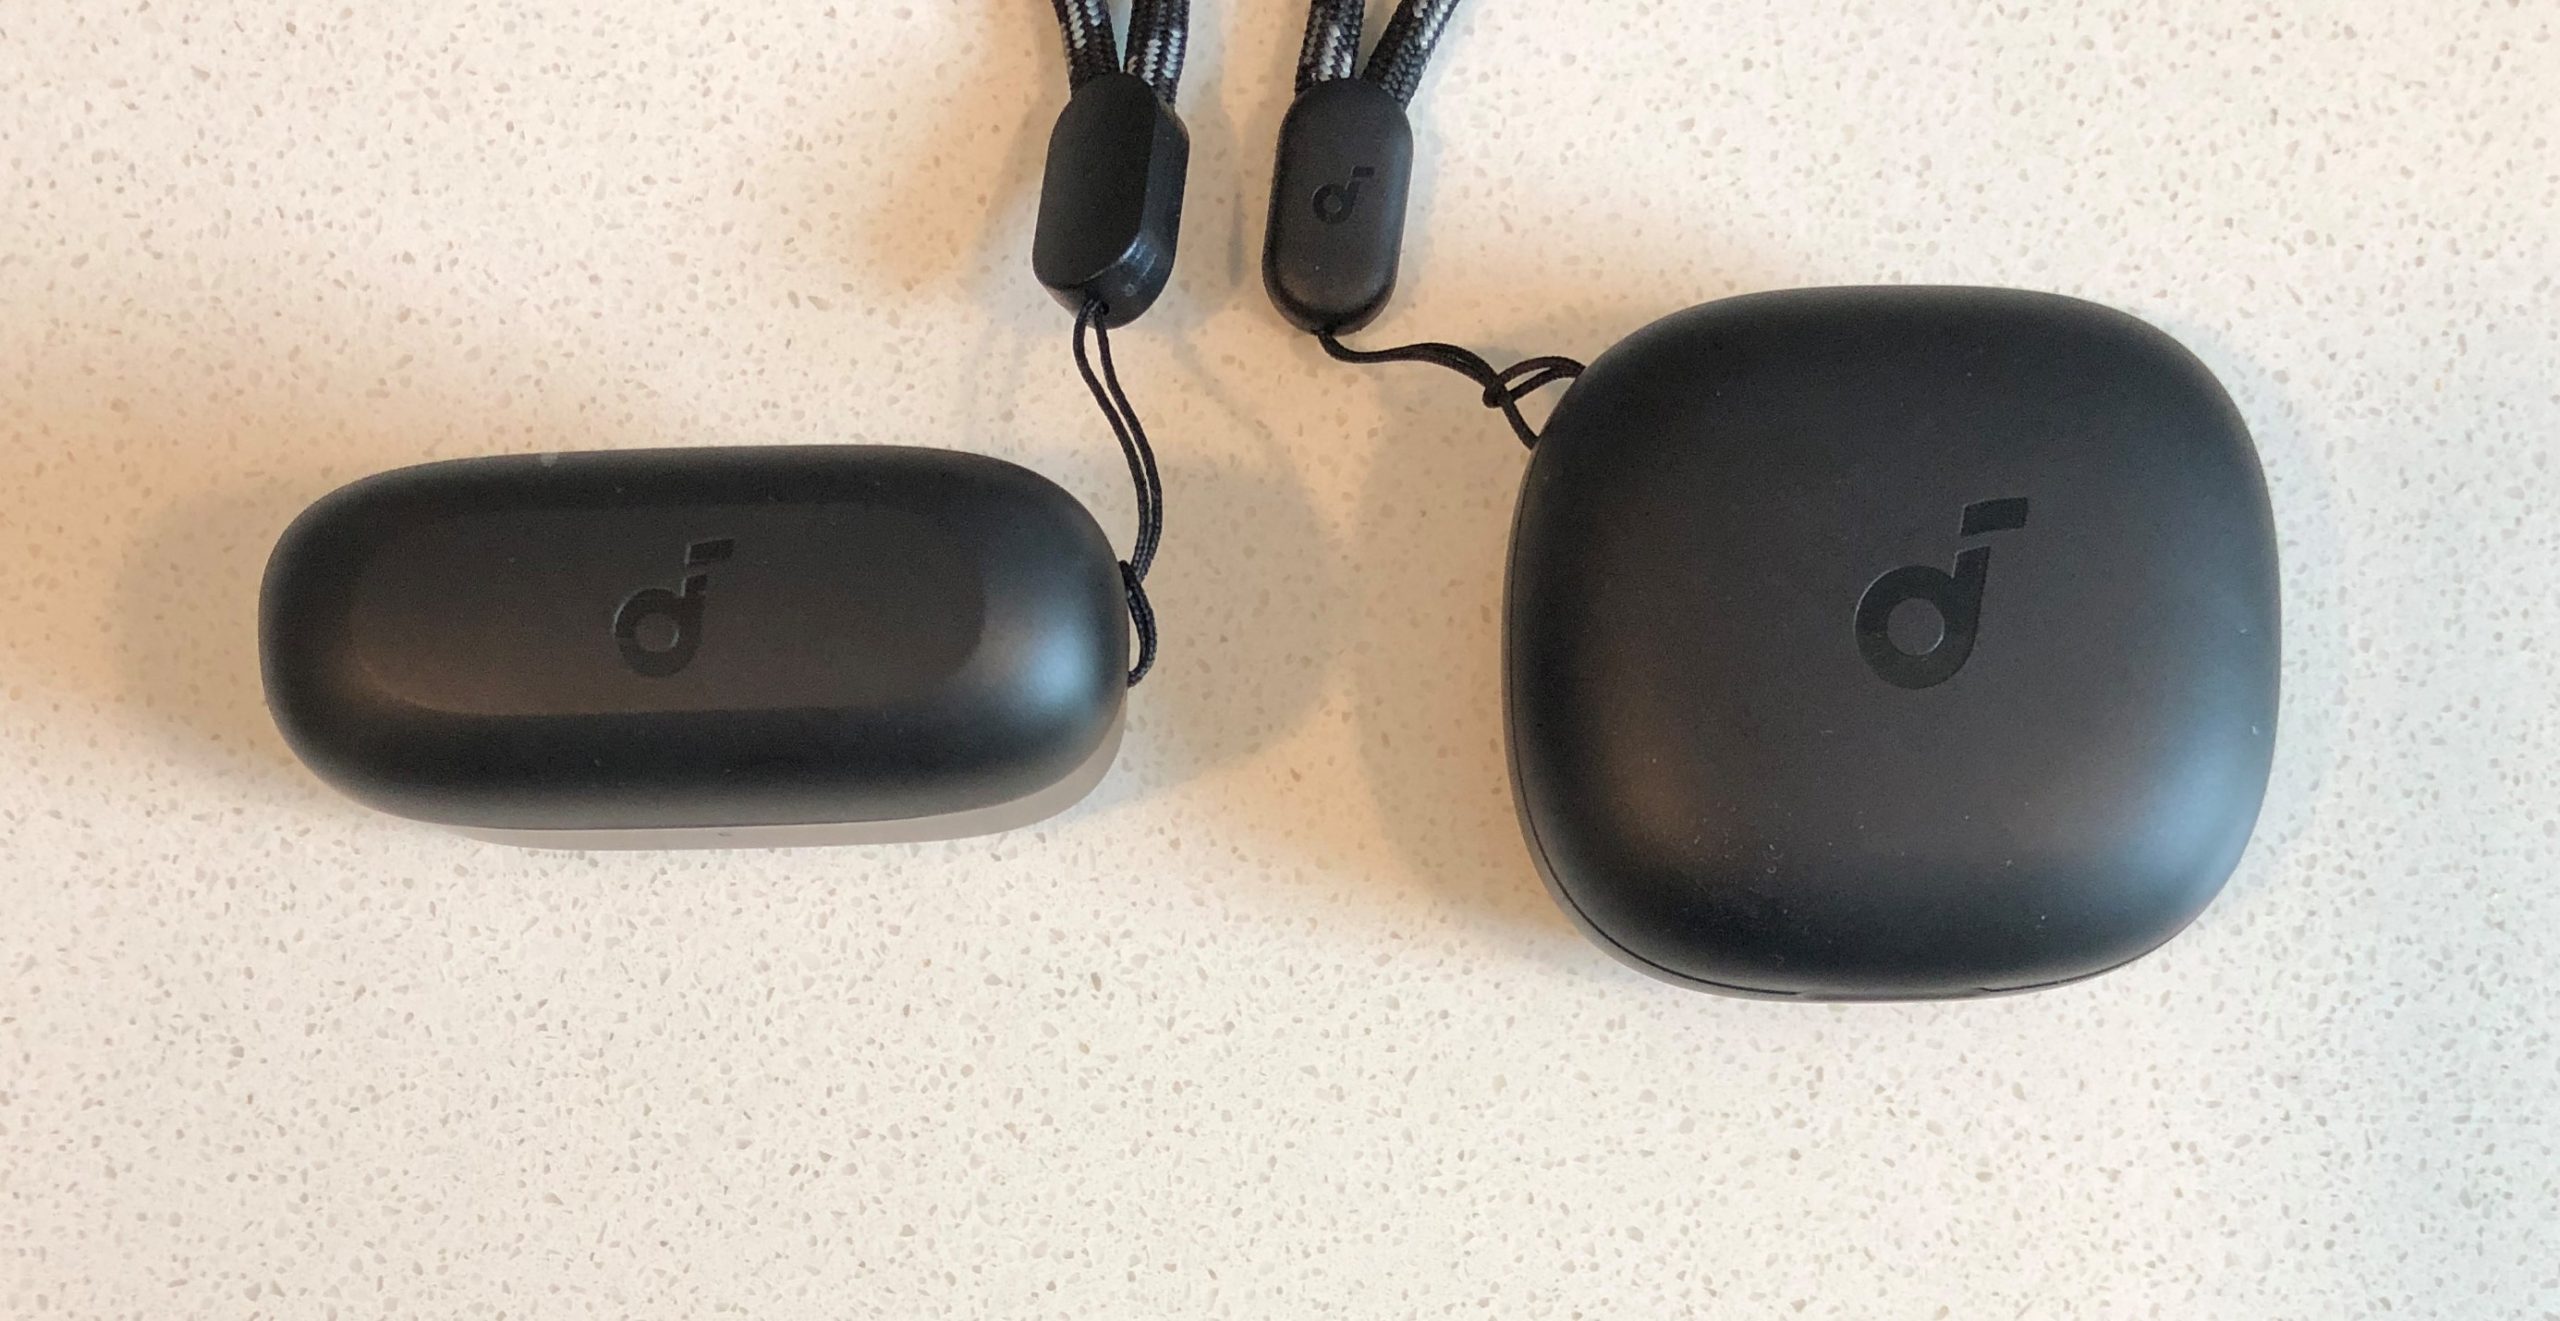 Soundcore A20i vs P20i charging and carrying case top